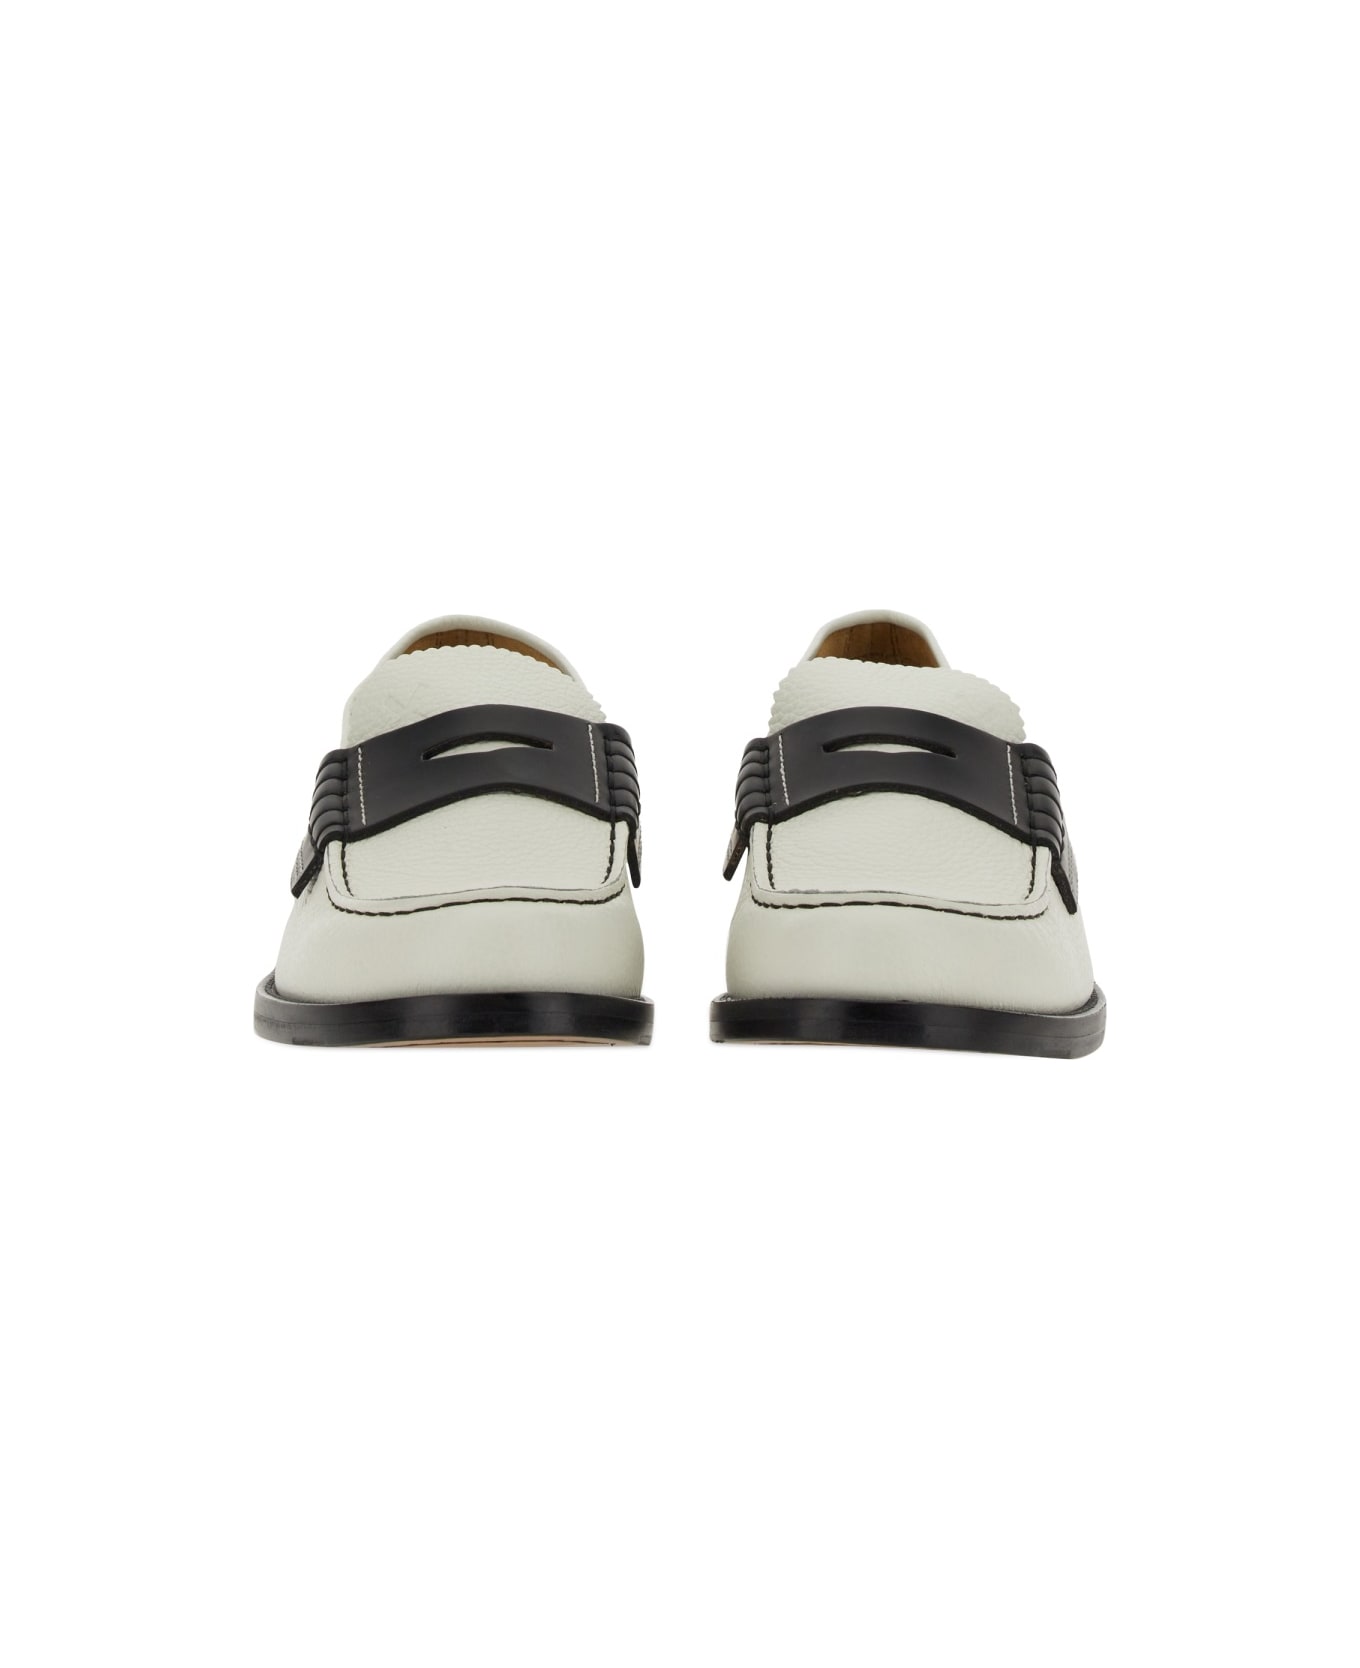 College Leather Loafer - WHITE